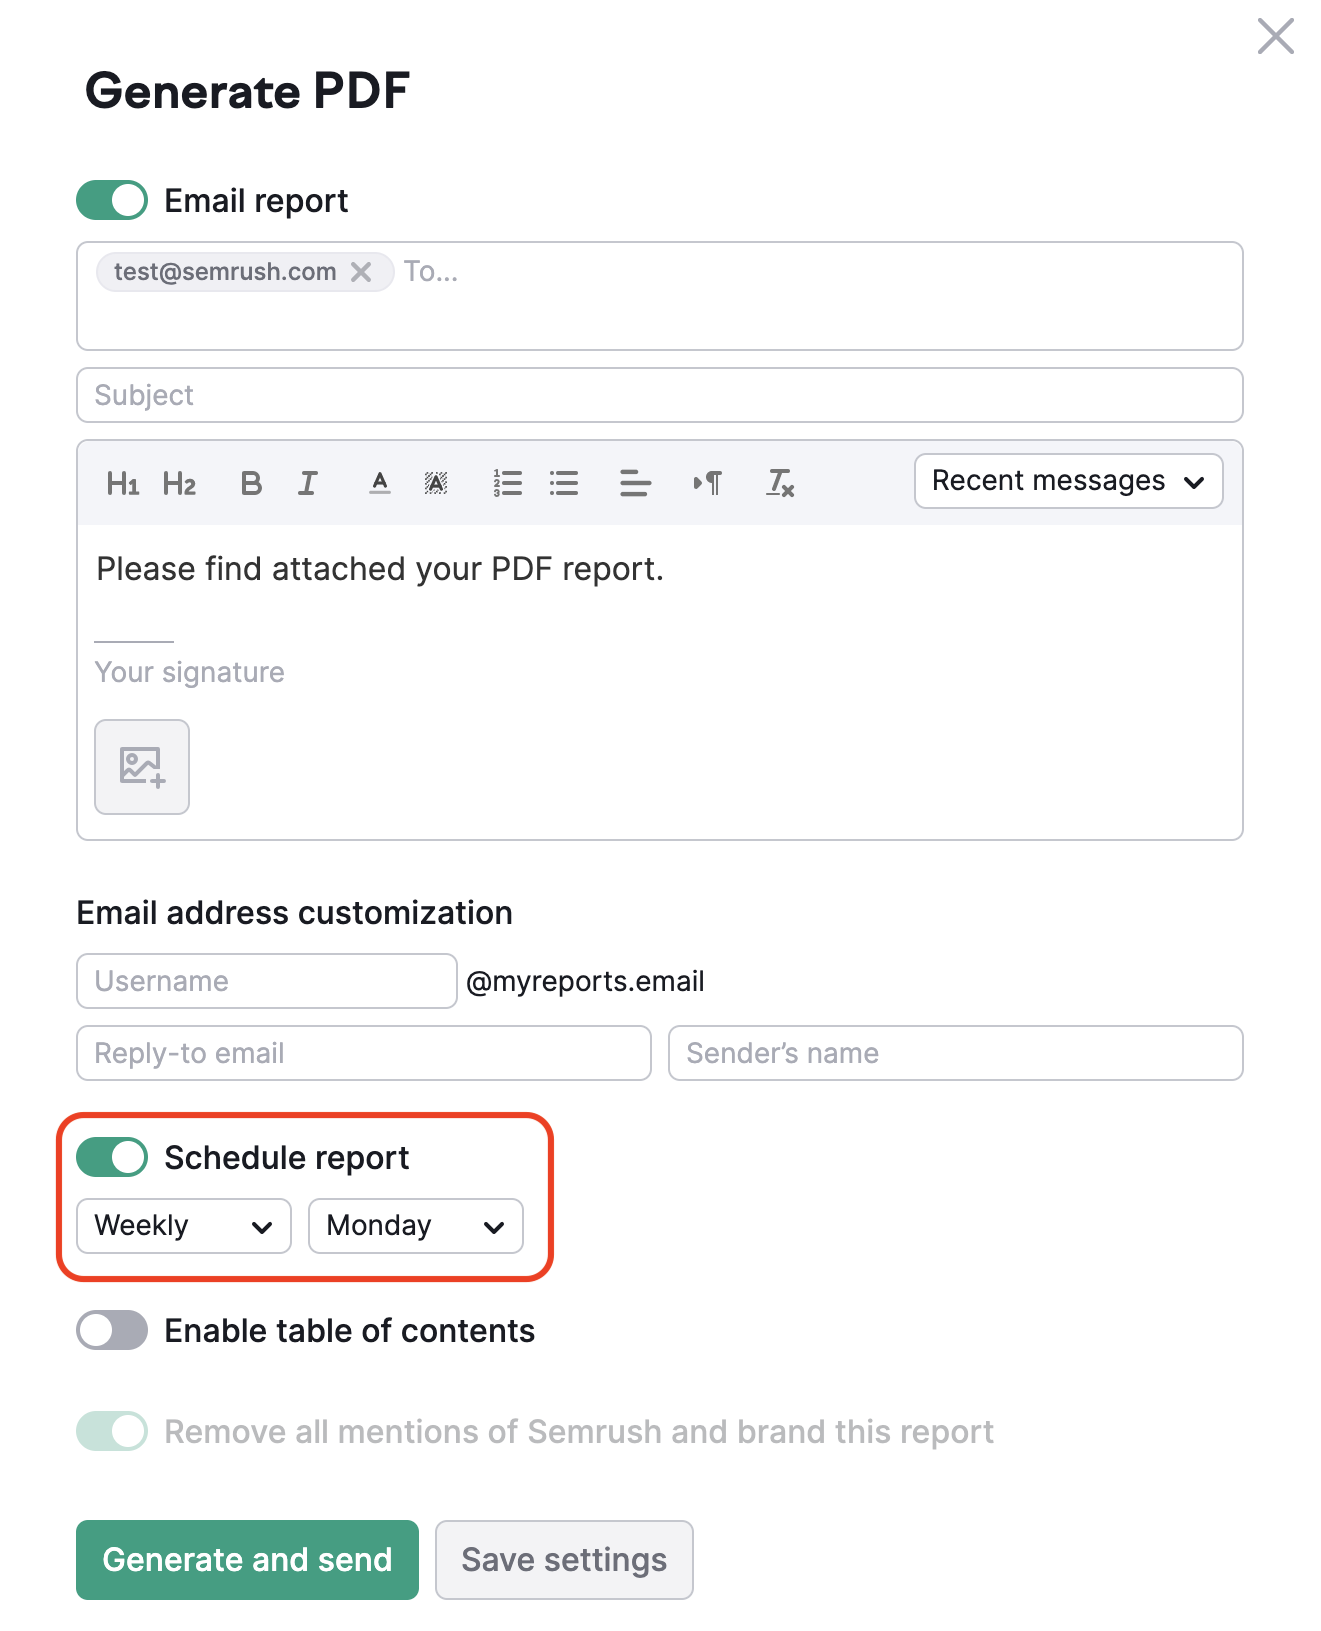 Generating and scheduling a report